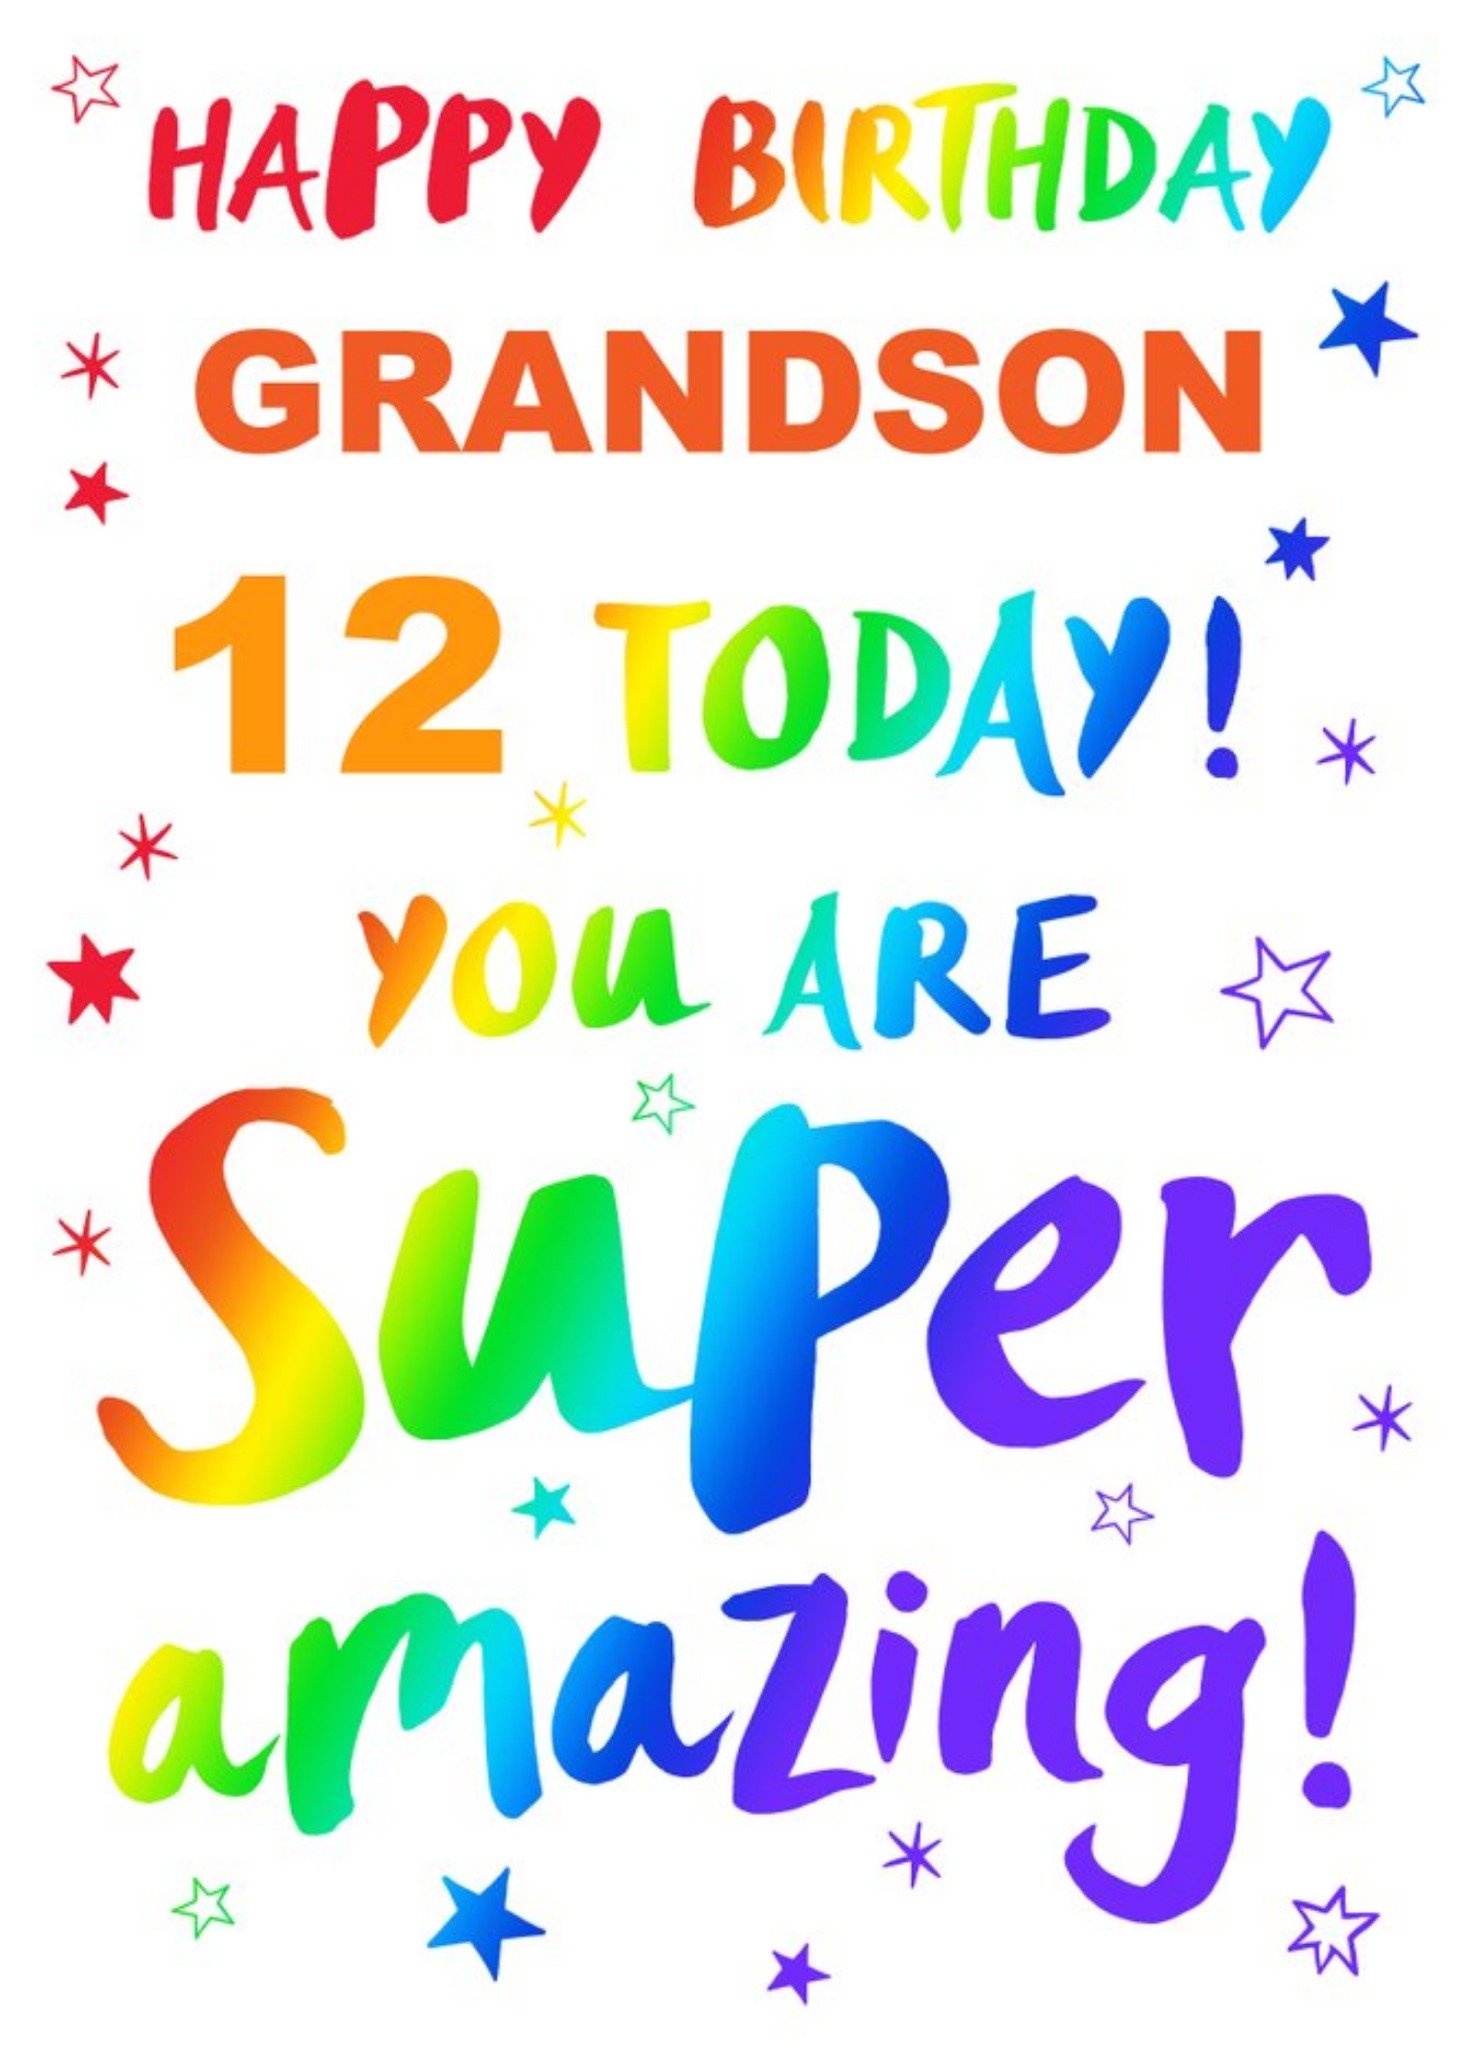 Moonpig Happy Birthday Grandson 12 Today You Are Super Amazing Card, Large